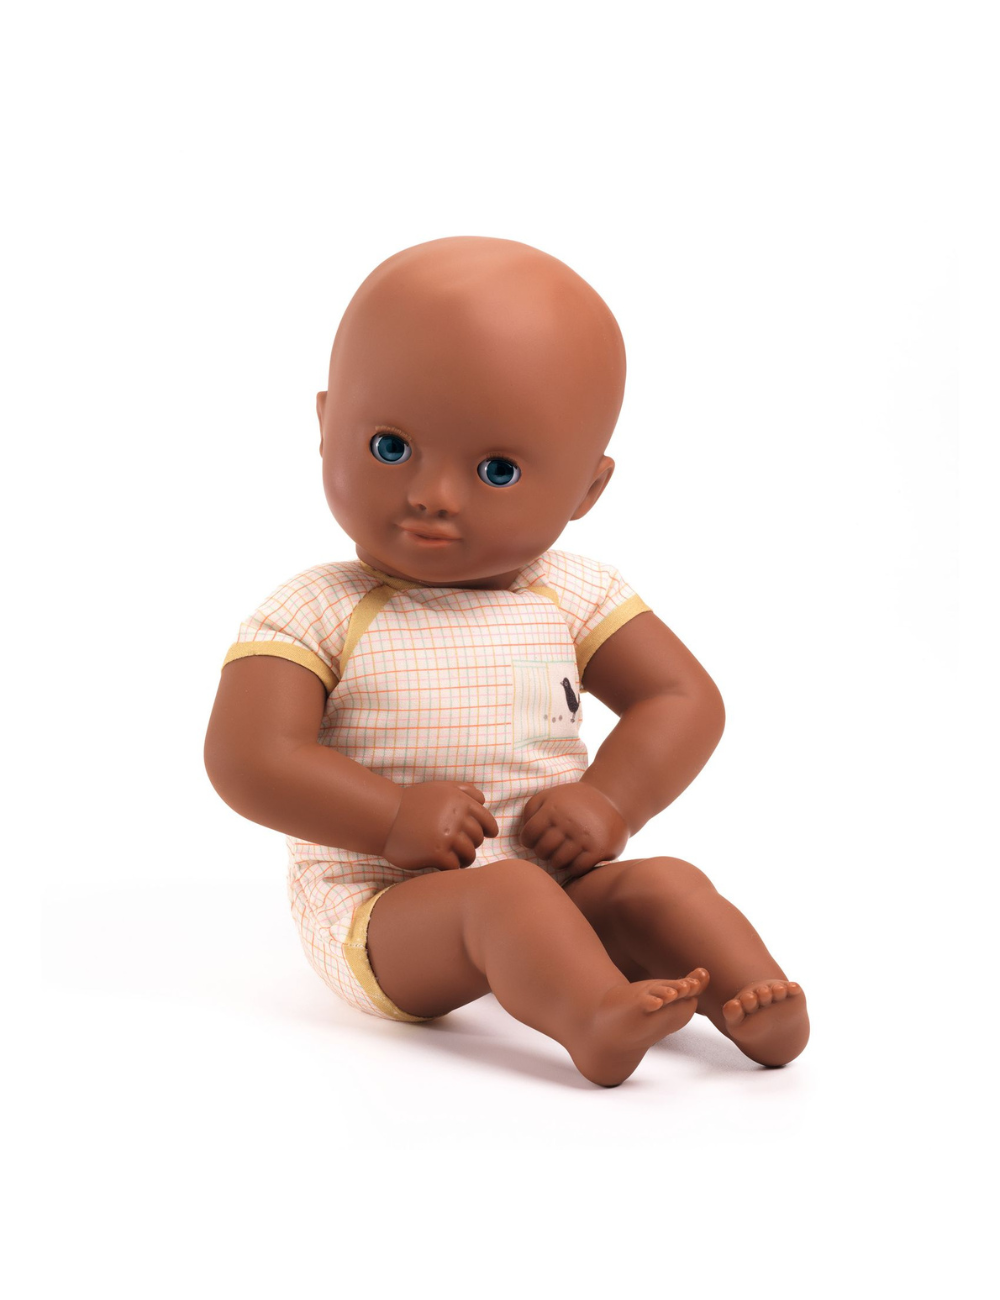 Dressable Pomea Soft Body Doll in Yellow